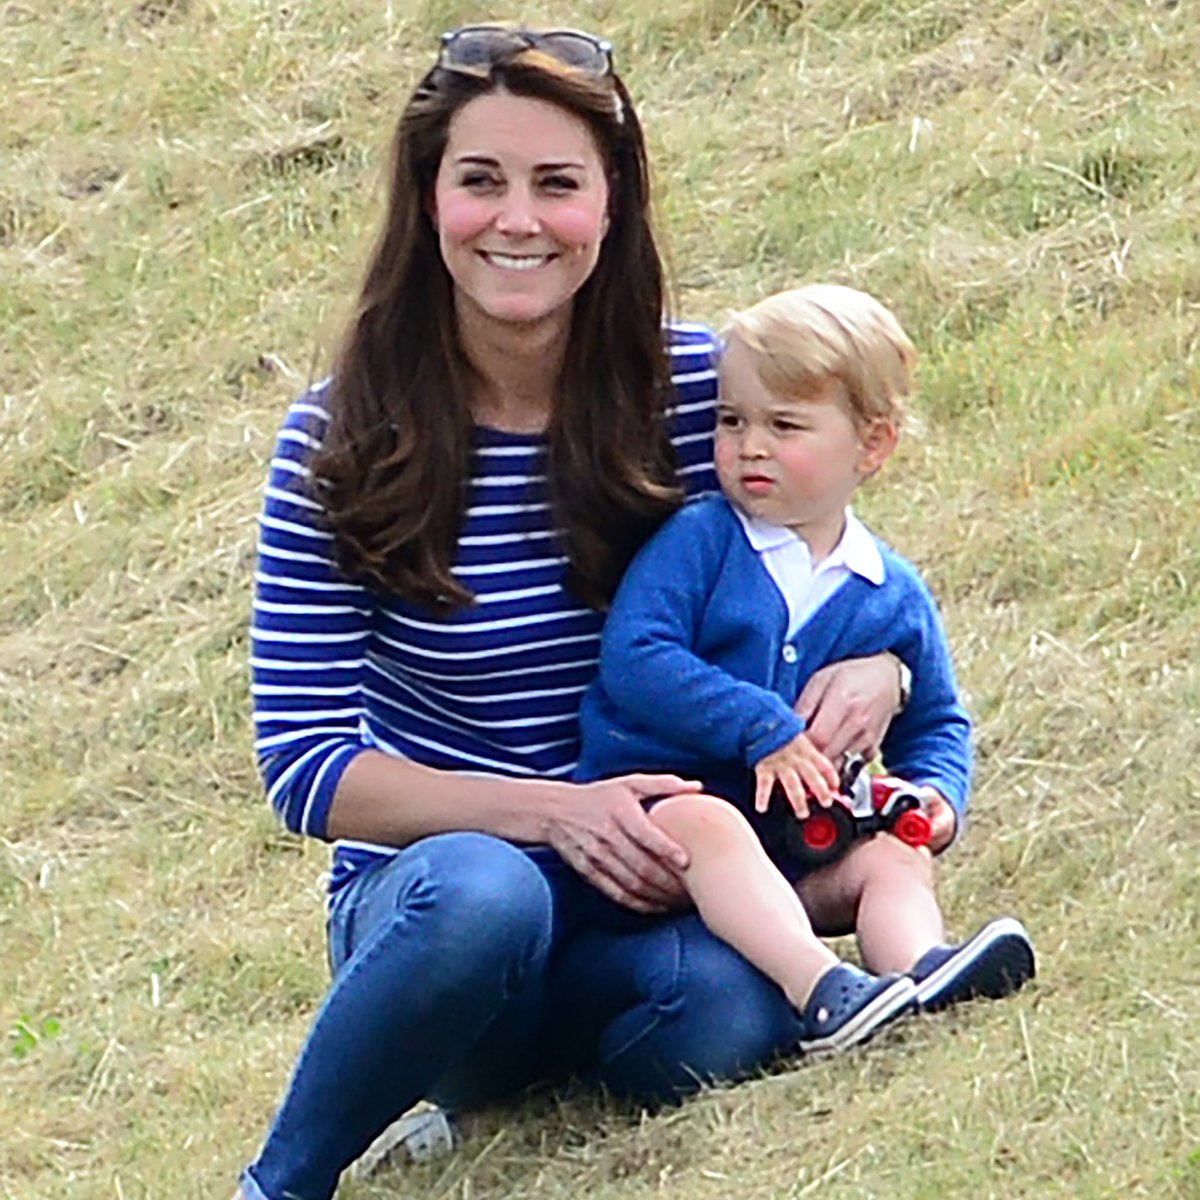 Kate, William, Charles and little George at Gigaset Charity Polo Match with Prince George of Cambridge at Beaufort Polo Club, Tetbury - 2015